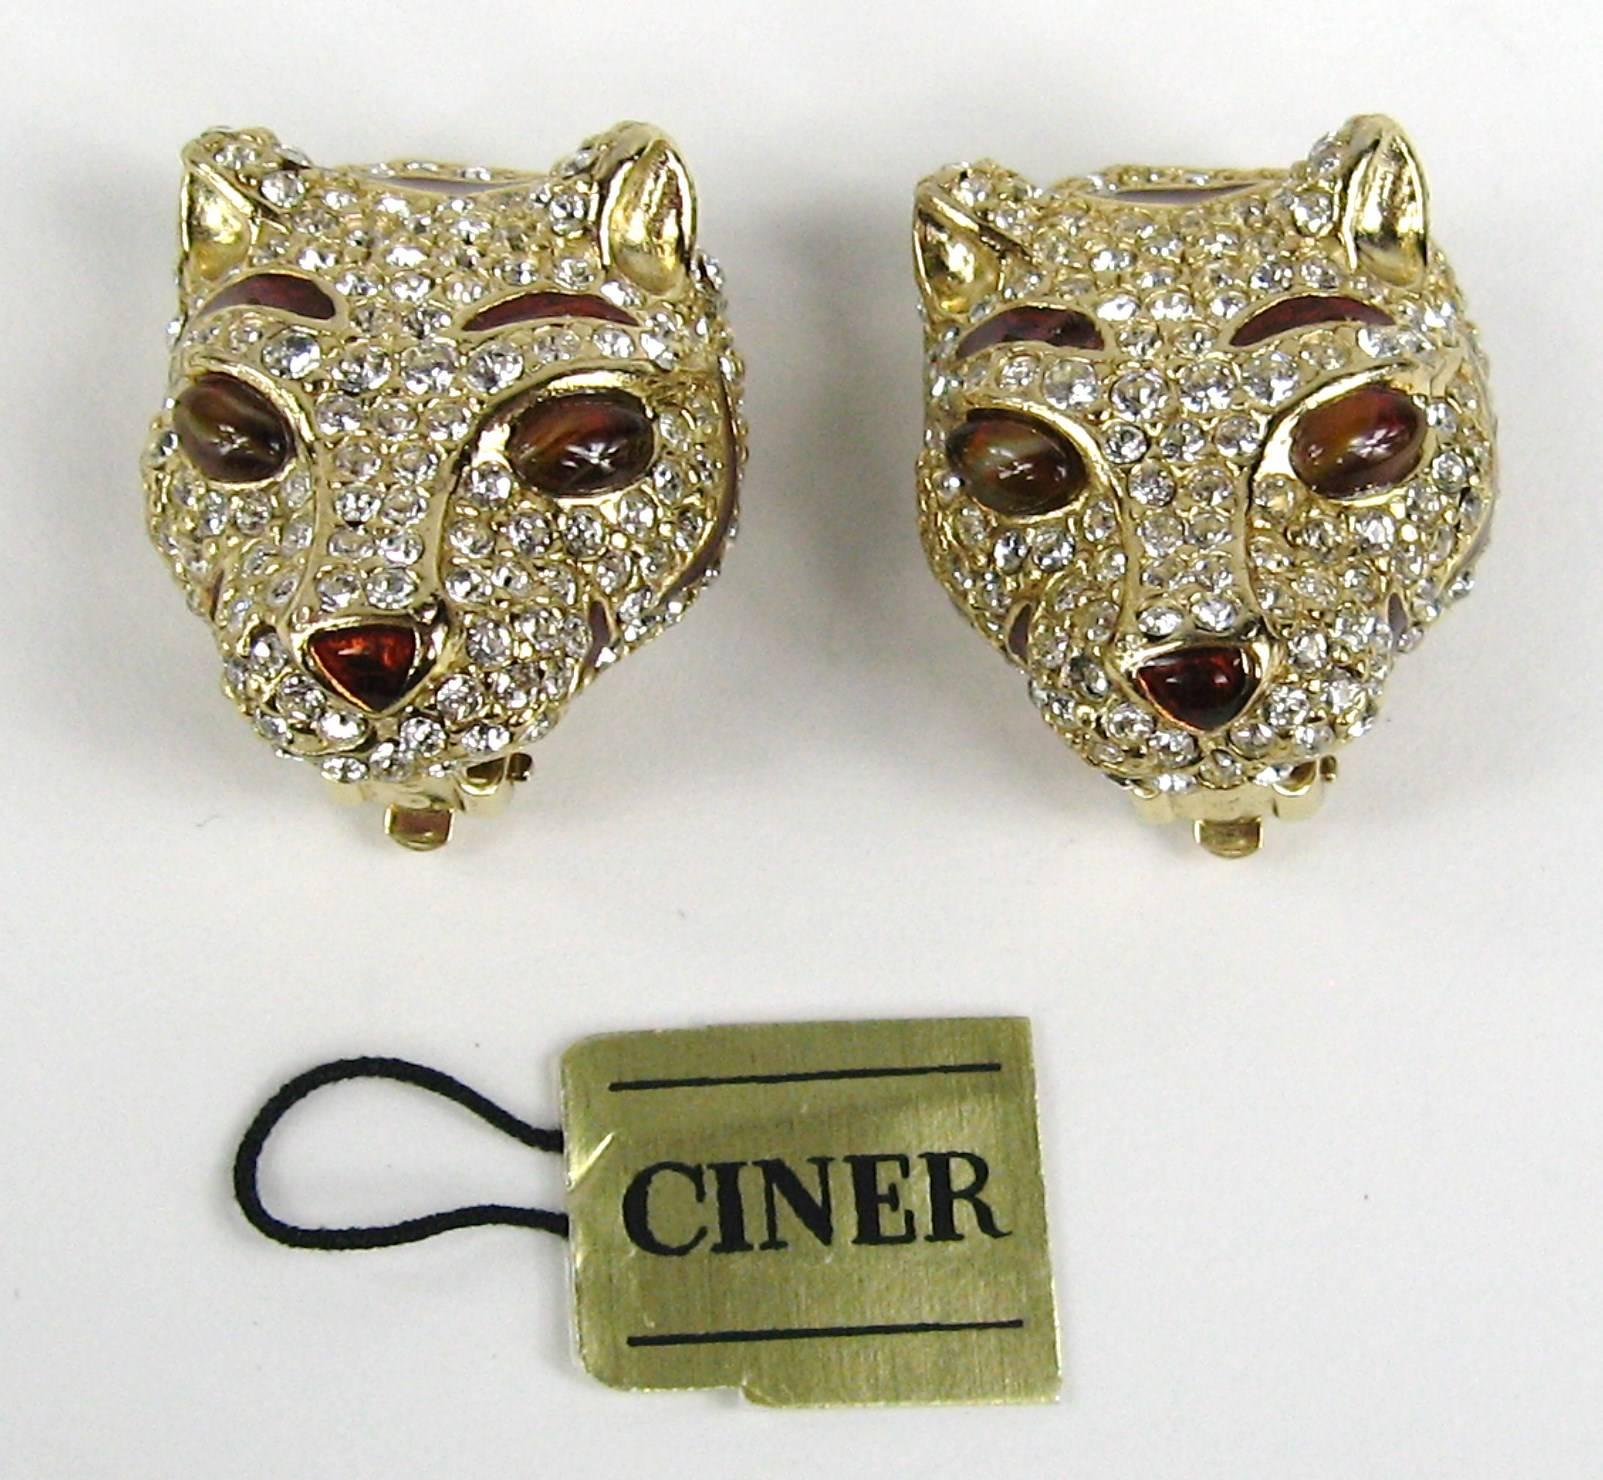 Tiger Ciner Swarovski Crystal Clip on earrings 
Matching Choker necklace available on our storefront as well

Bronze enamel with clear Crystals make up the head of the tiger 

Measuring 
1.16